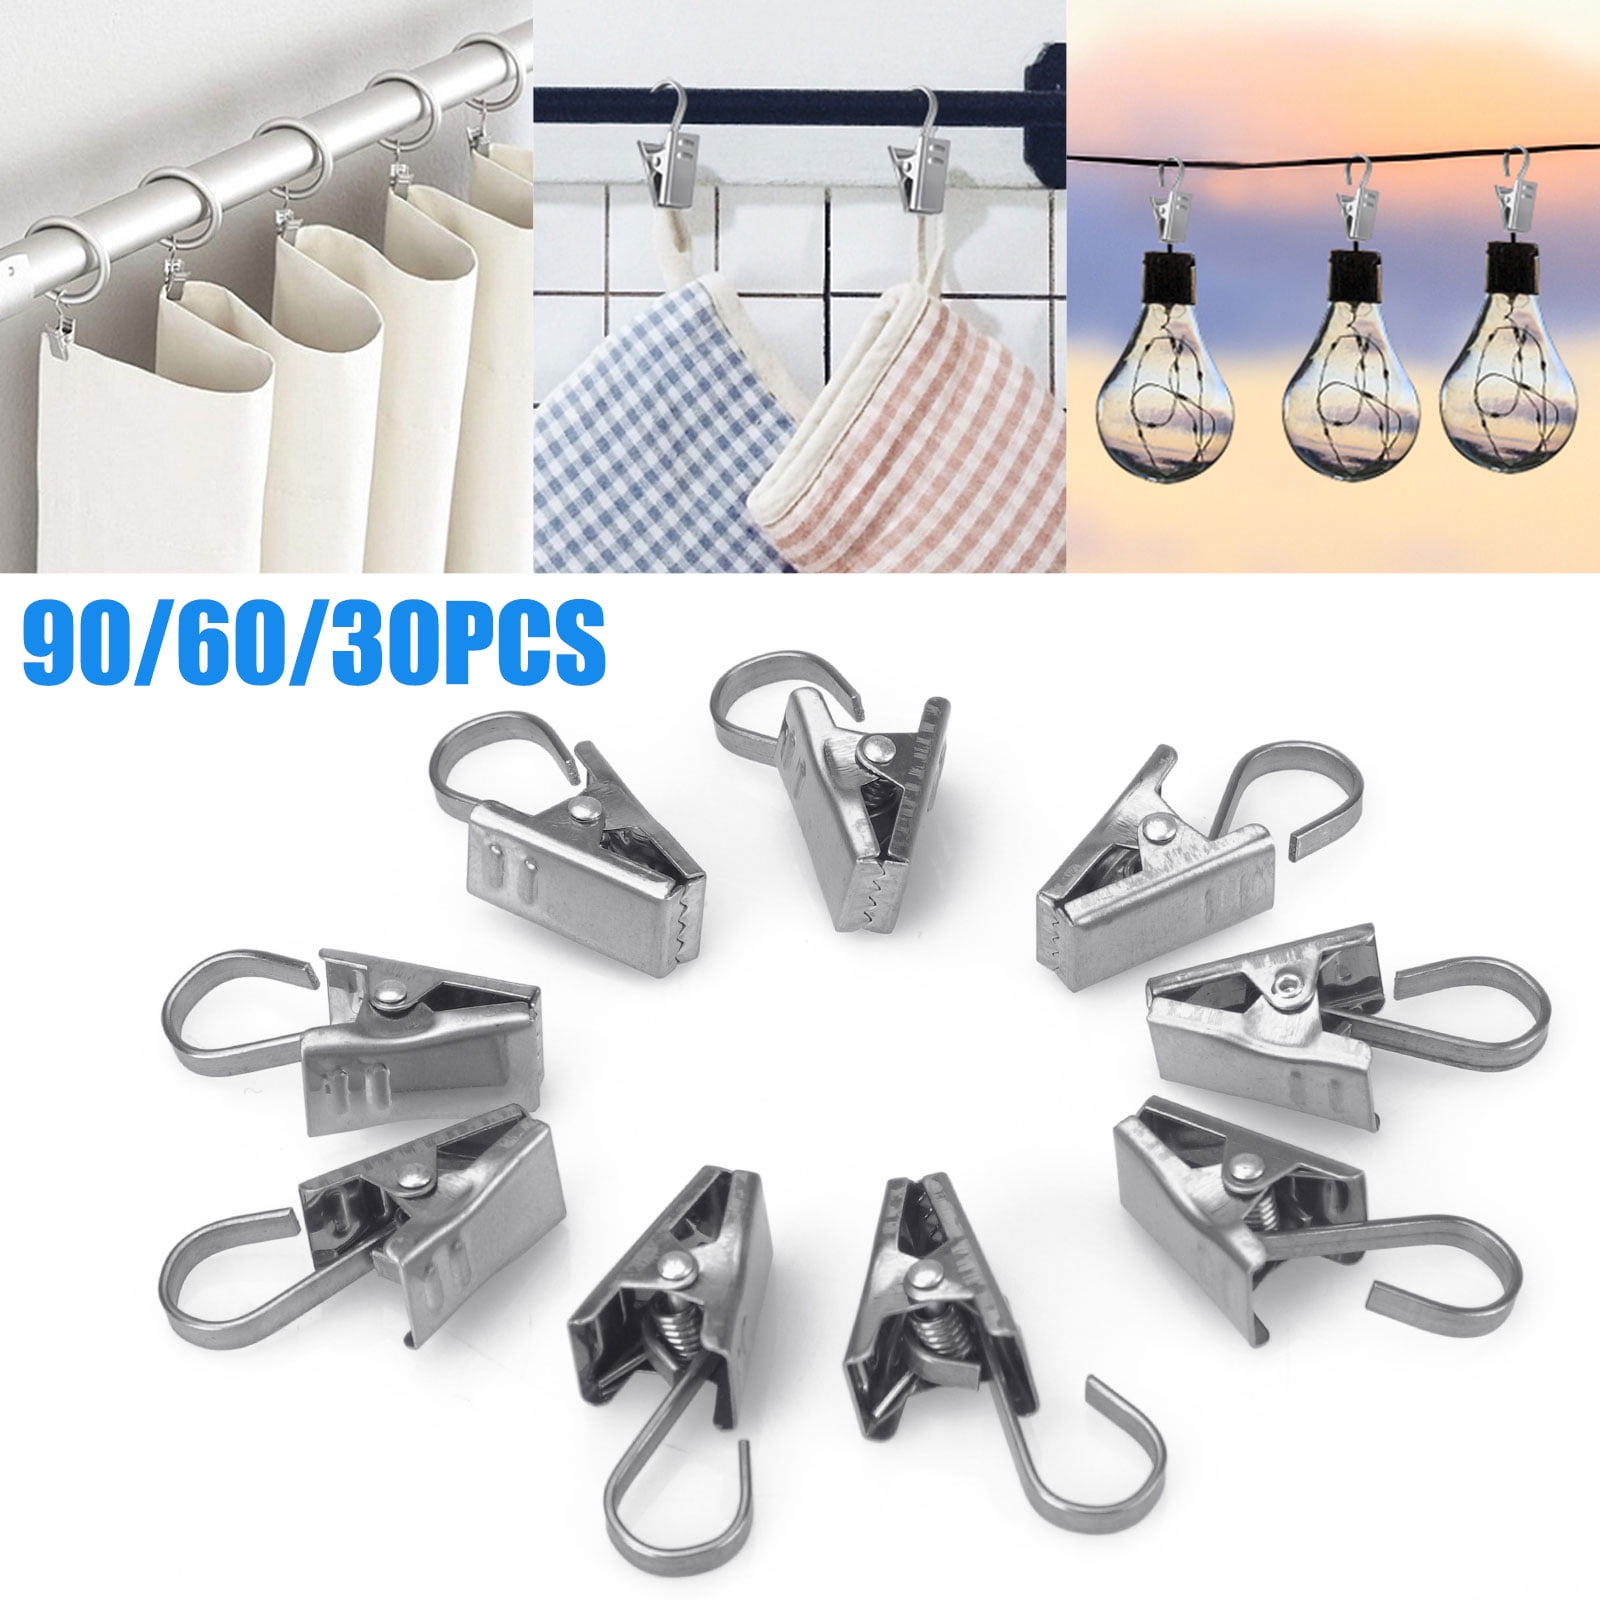 30pcs Drapery Clips Hook Window Shower Curtain Rings Rod Clips Stainless Steel